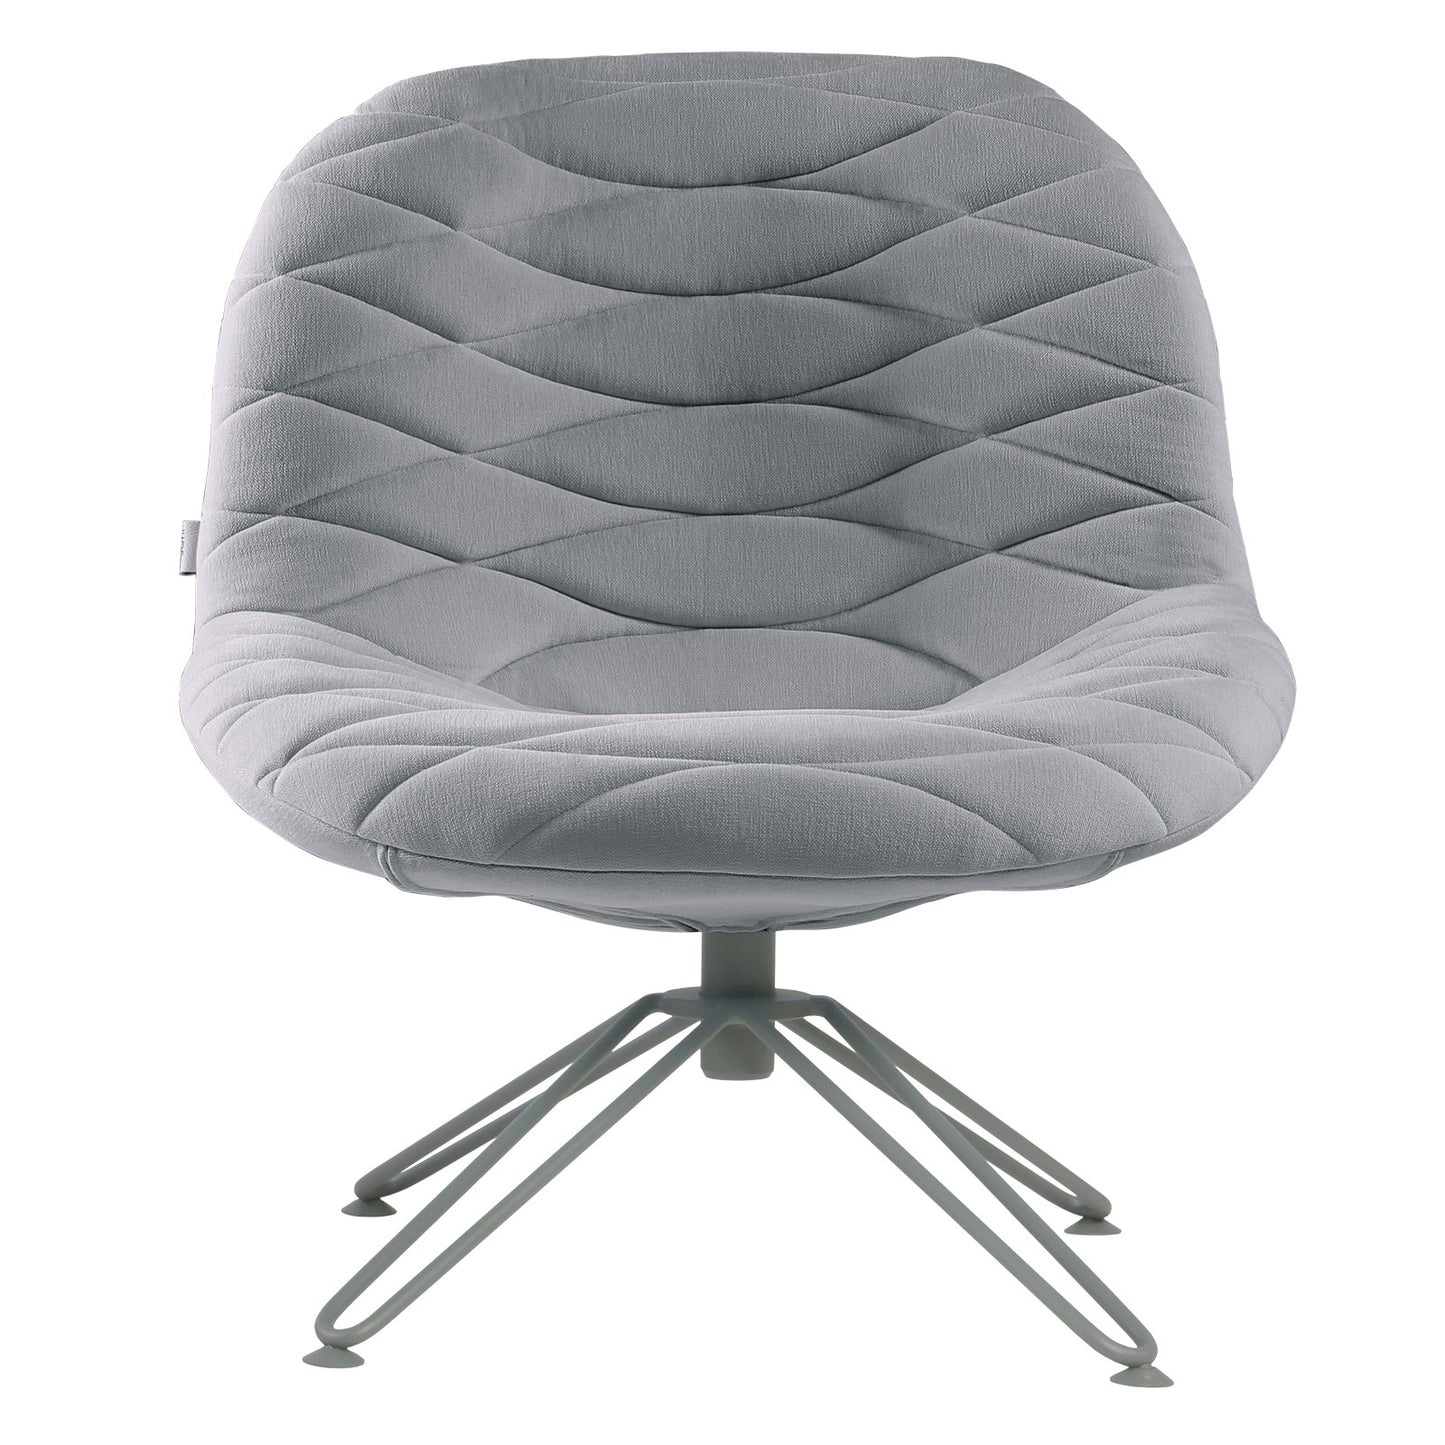 Lounge chair Mannequin Lounge 03 - Grey